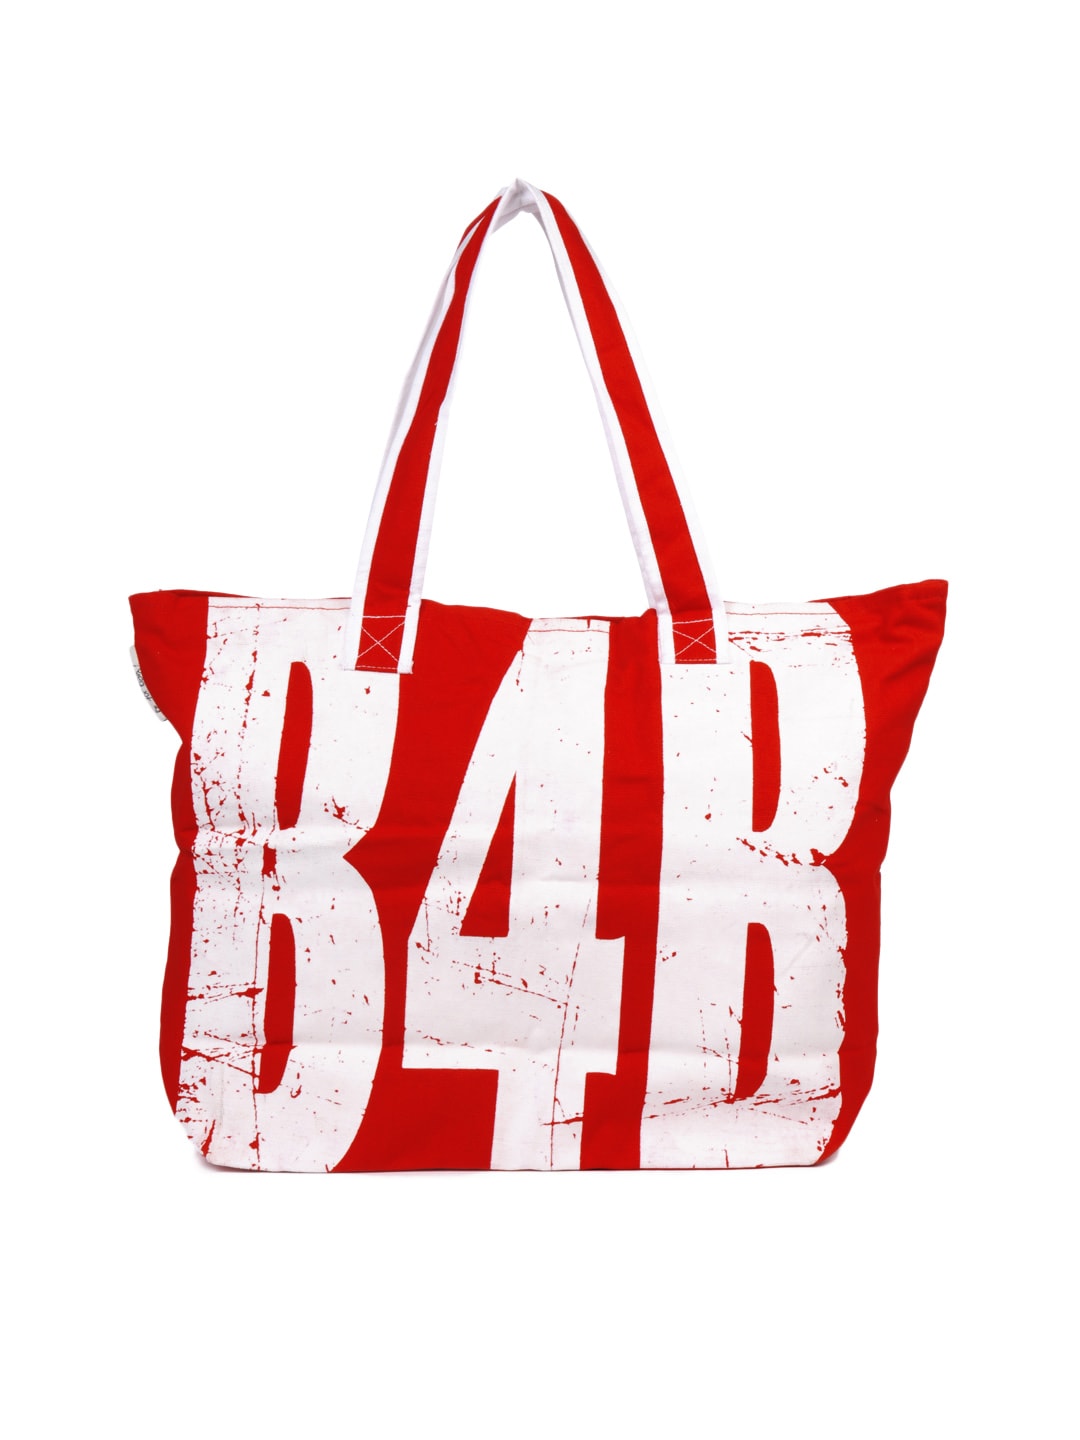 Be For Bag Women Red Tote Bag